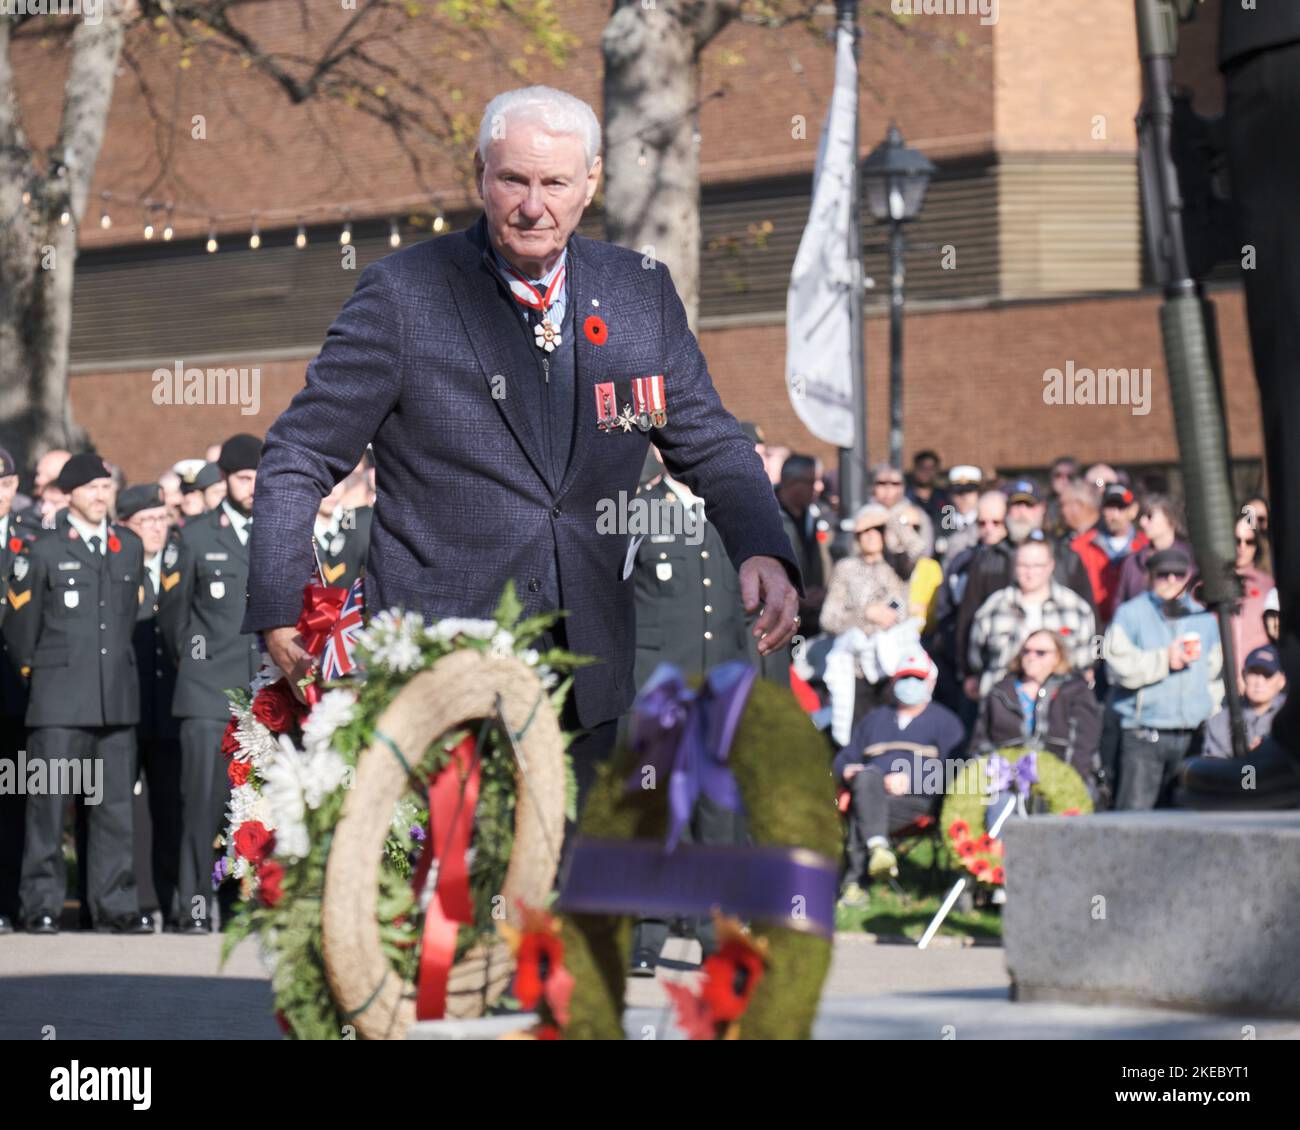 Halifax, Nova Scotia, Canada. November 11th, 2022. British Honorary Consul in Halifax, Mr. Alfred A. Smithers placing a wreath at Remembrance Day at a ceremony held at the Halifax Cenotaph. Credit: meanderingemu/Alamy Live News Stock Photo